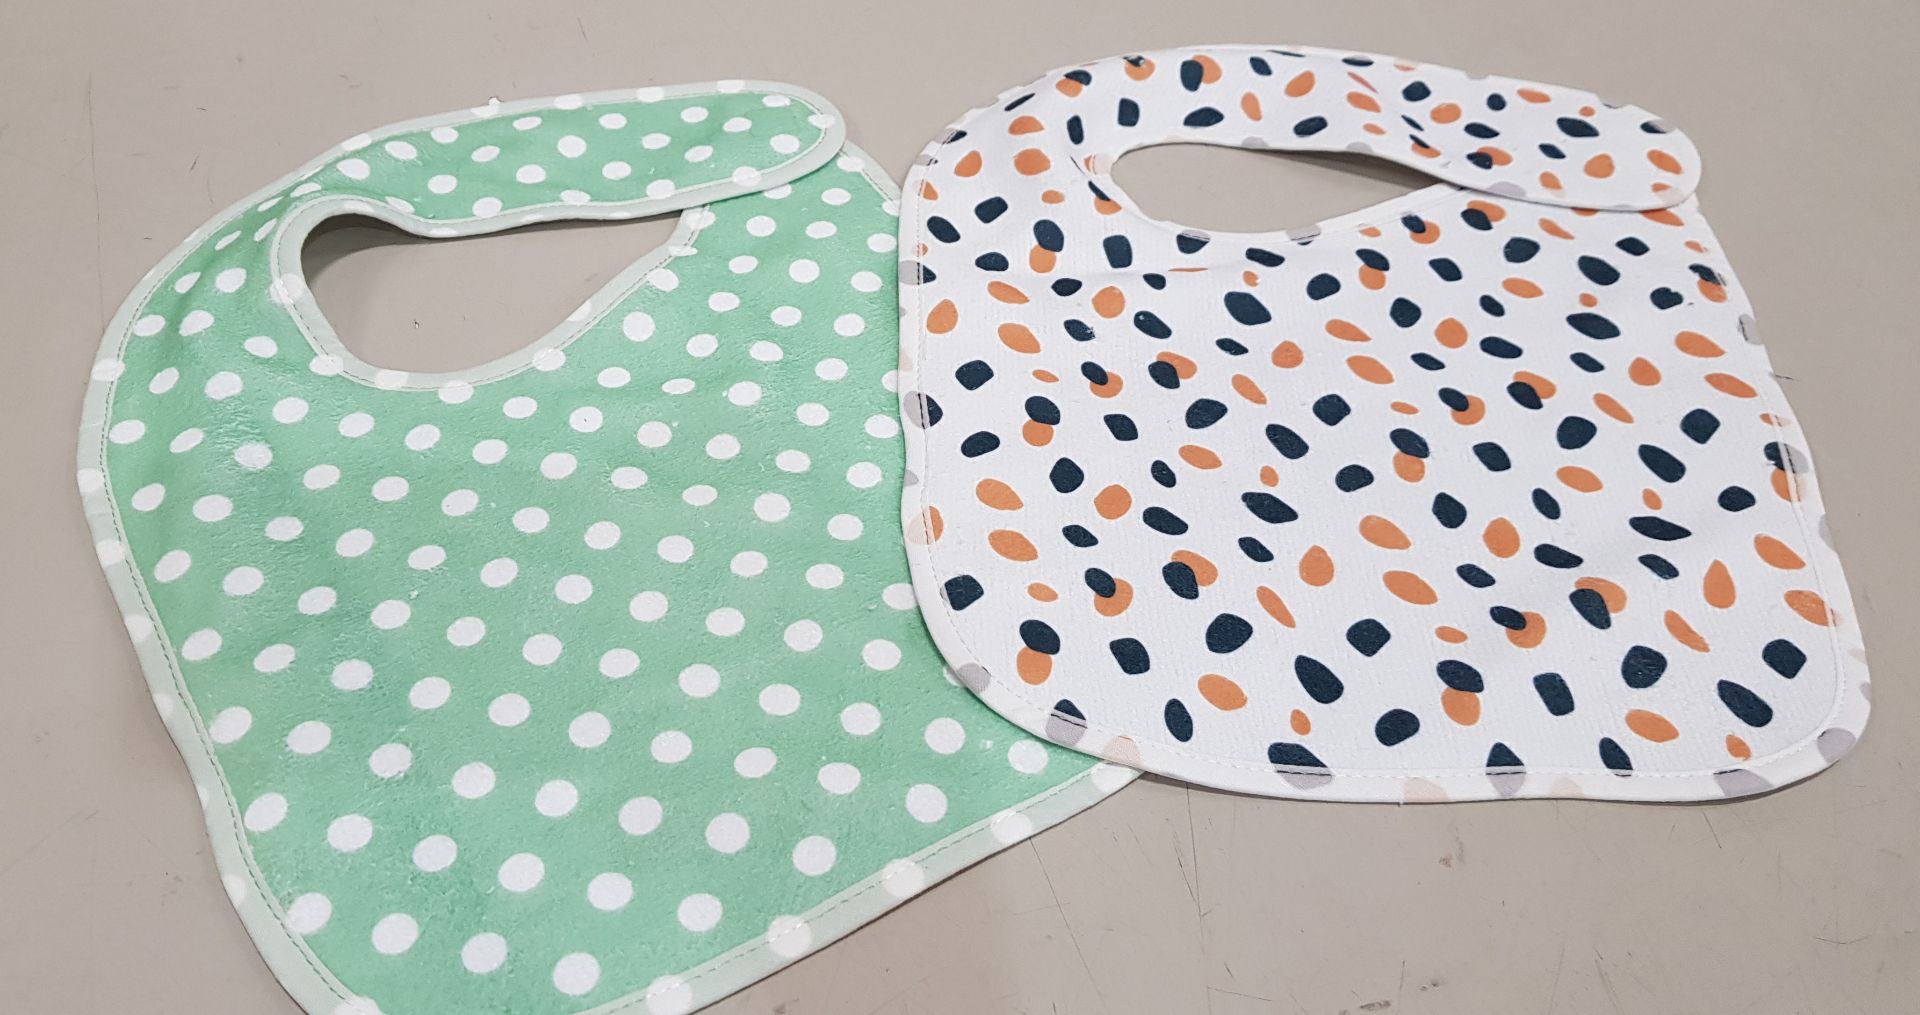 100 X BRAND NEW PET BIBS WITH SPOTTED PRINT IN SIZES - SMALL - MEDIUM AND LARGE